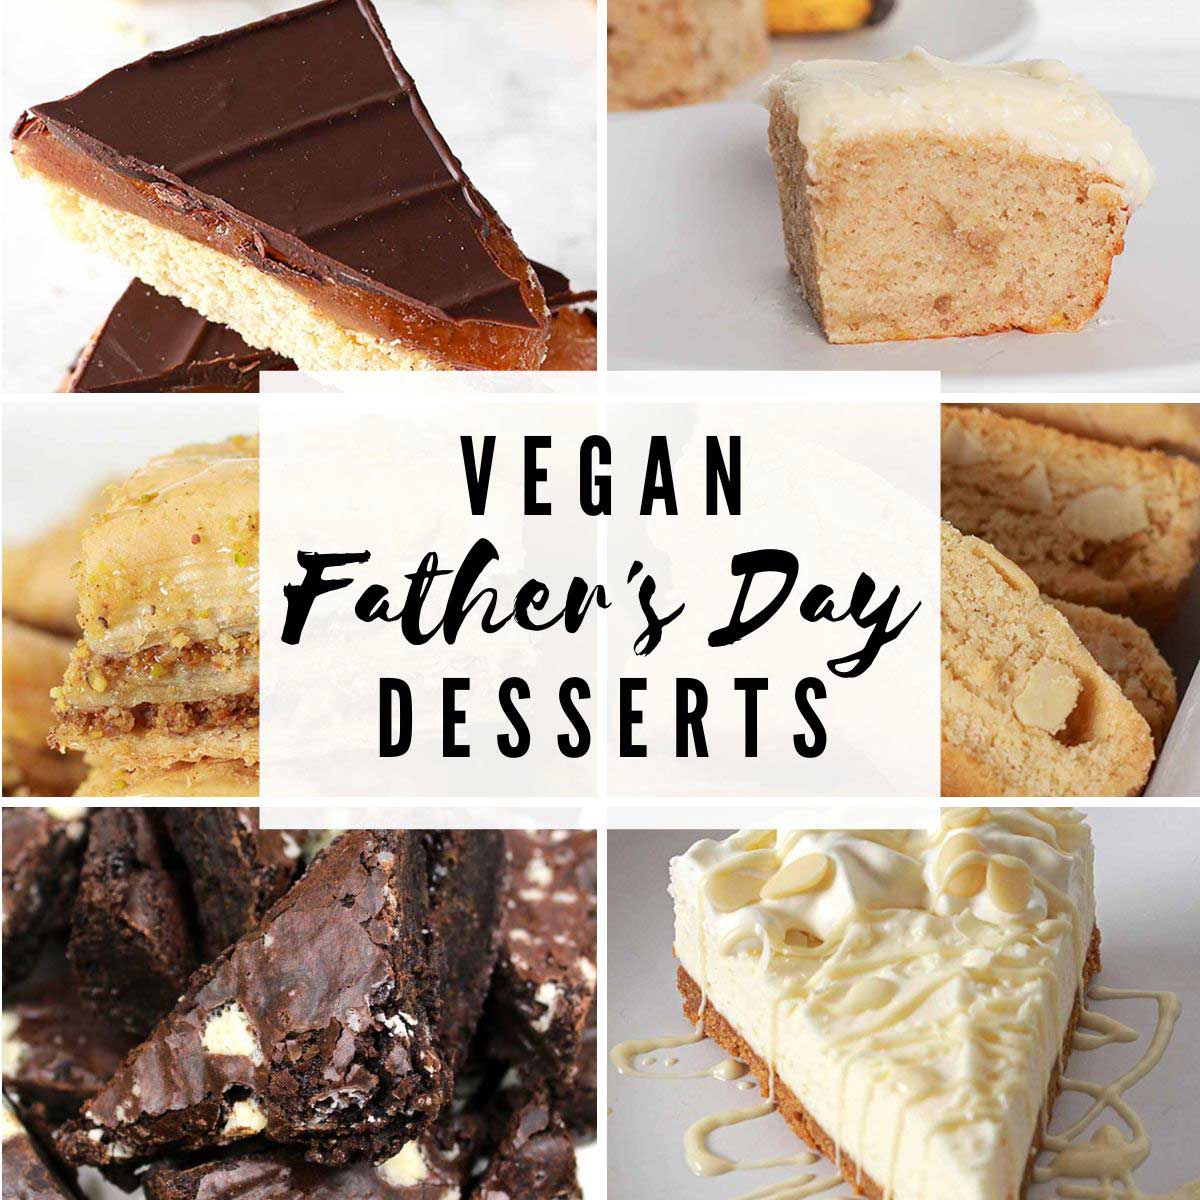 6 Dessert Images With Text Overlay That Reads 'vegan Fathers Day Desserts'